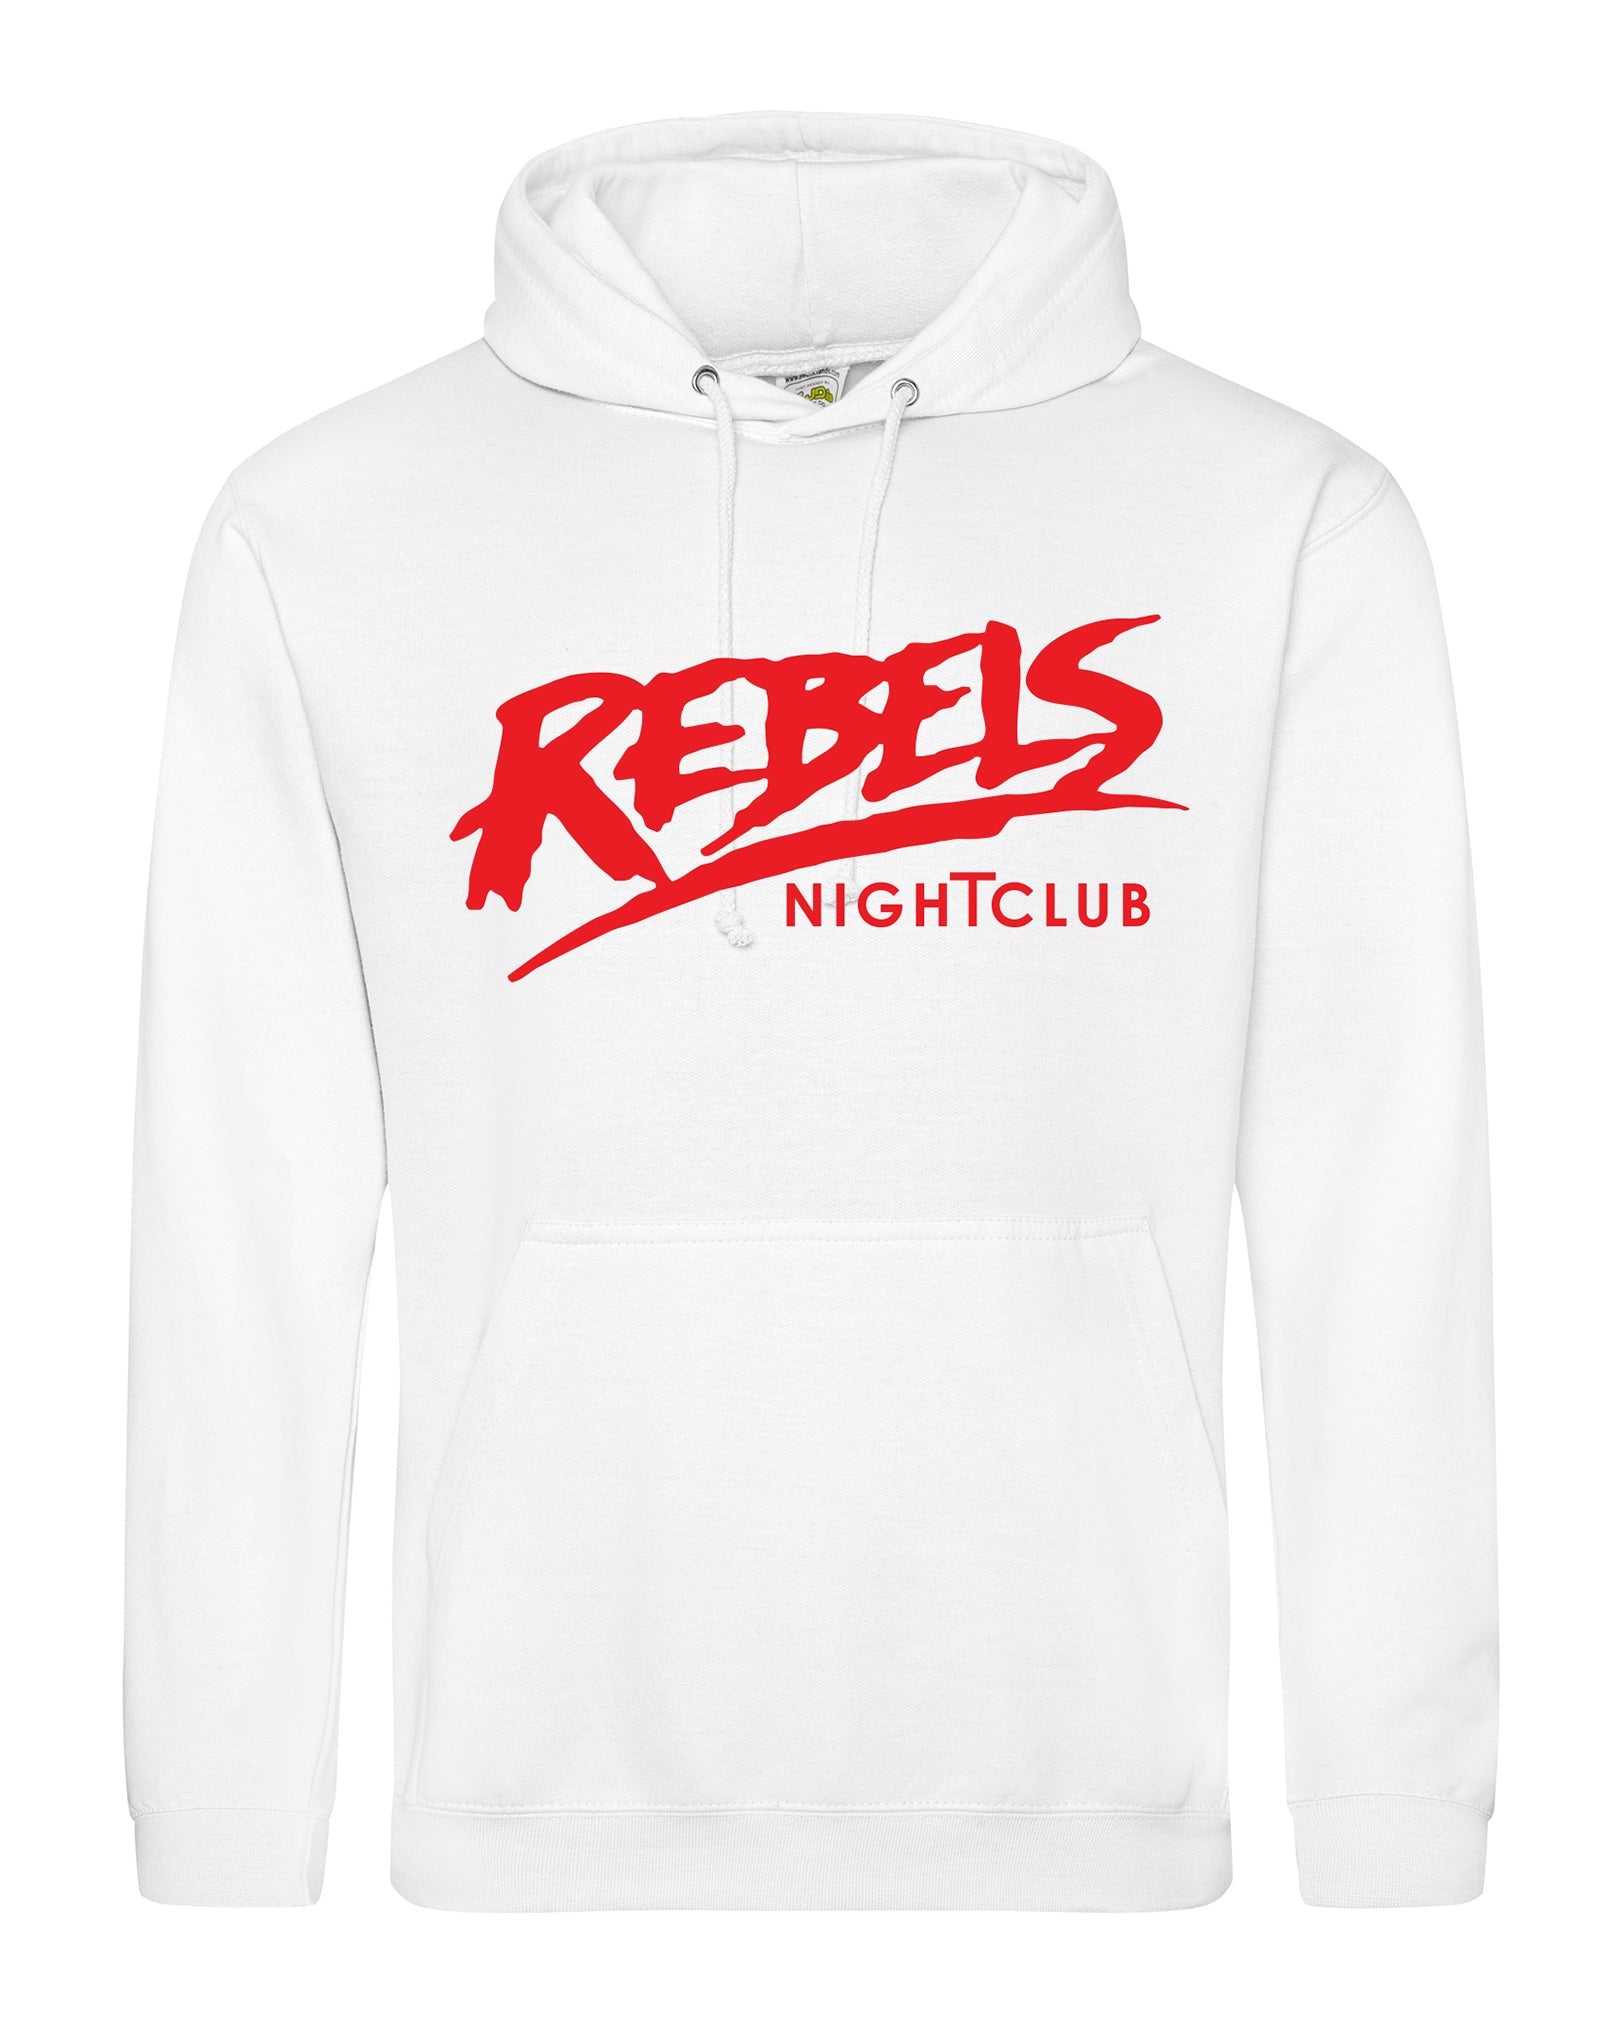 Rebels original sign unisex fit hoodie - various colours - Dirty Stop Outs